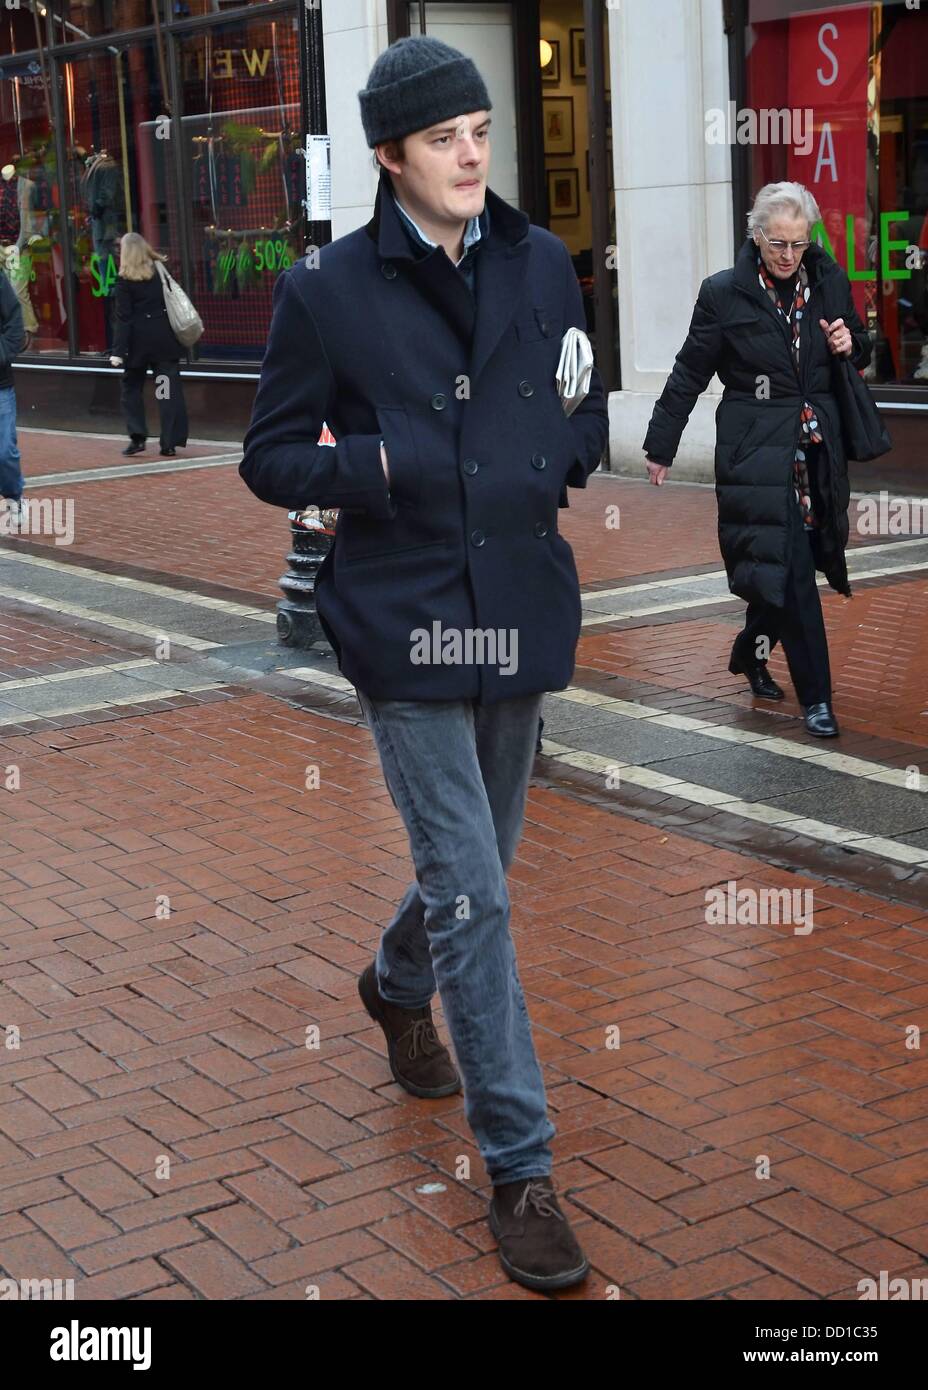 British actor Sam Riley (Control) seen walking down Grafton Street with a newspaper under his arm. He is currently in Ireland filming 'Byzantium' with Saoirse Ronan & Gemma Arterton, Dublin, Ireland - 24.01.12. Stock Photo